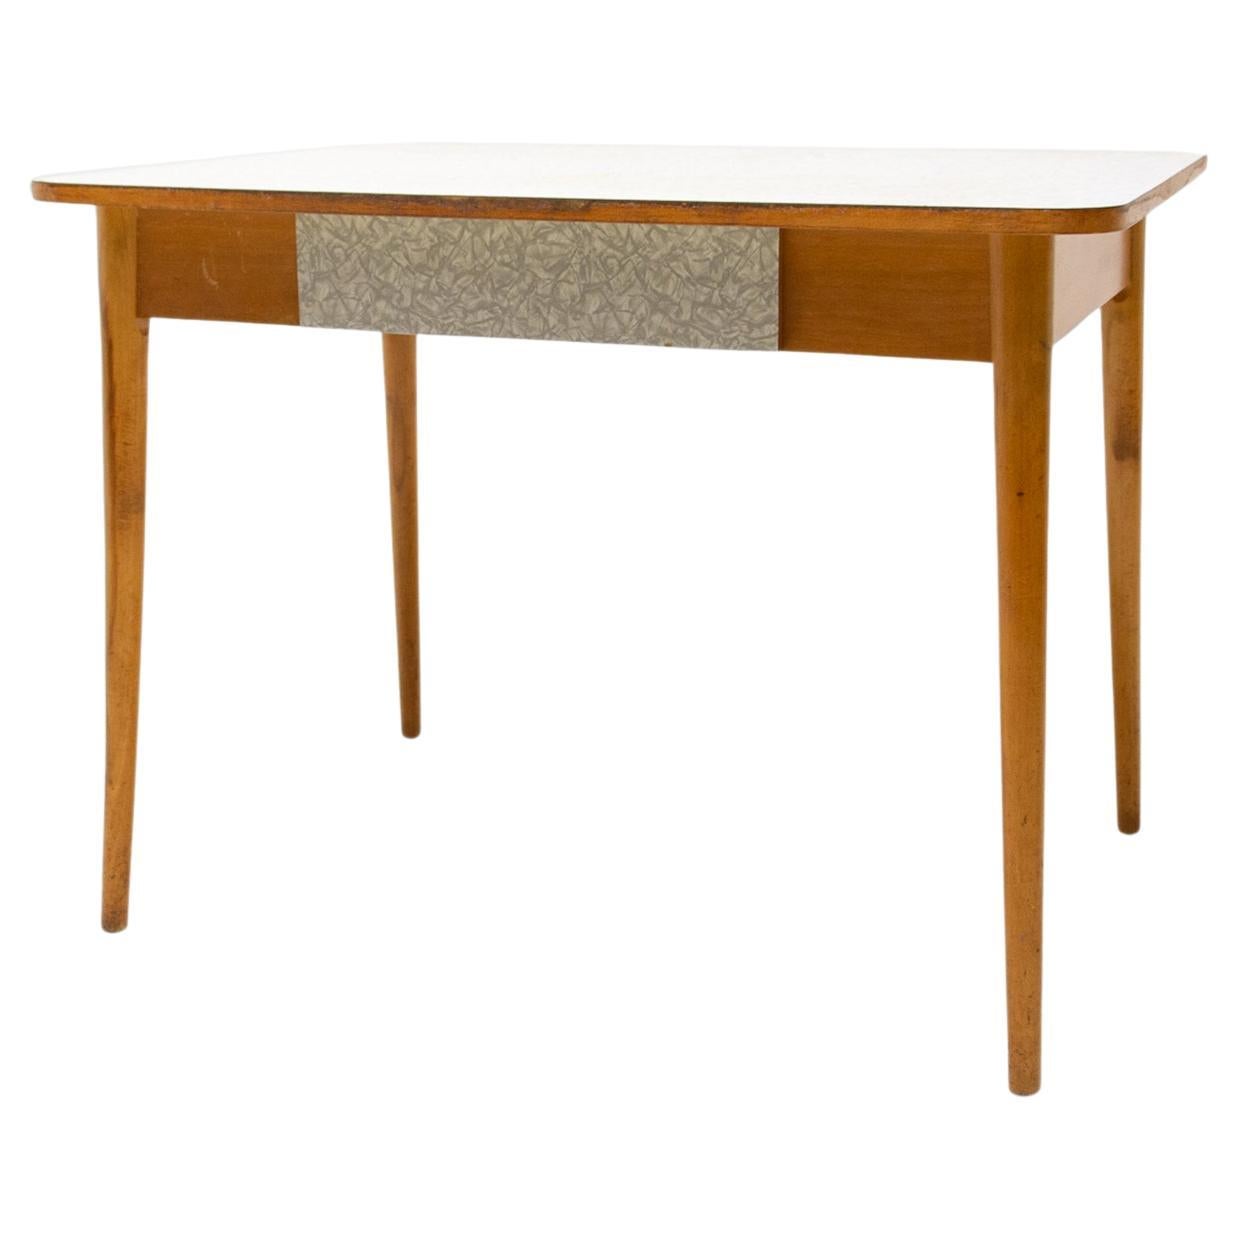  Midcentury Formica and Wood Central Table, Czechoslovakia, 1960's For Sale